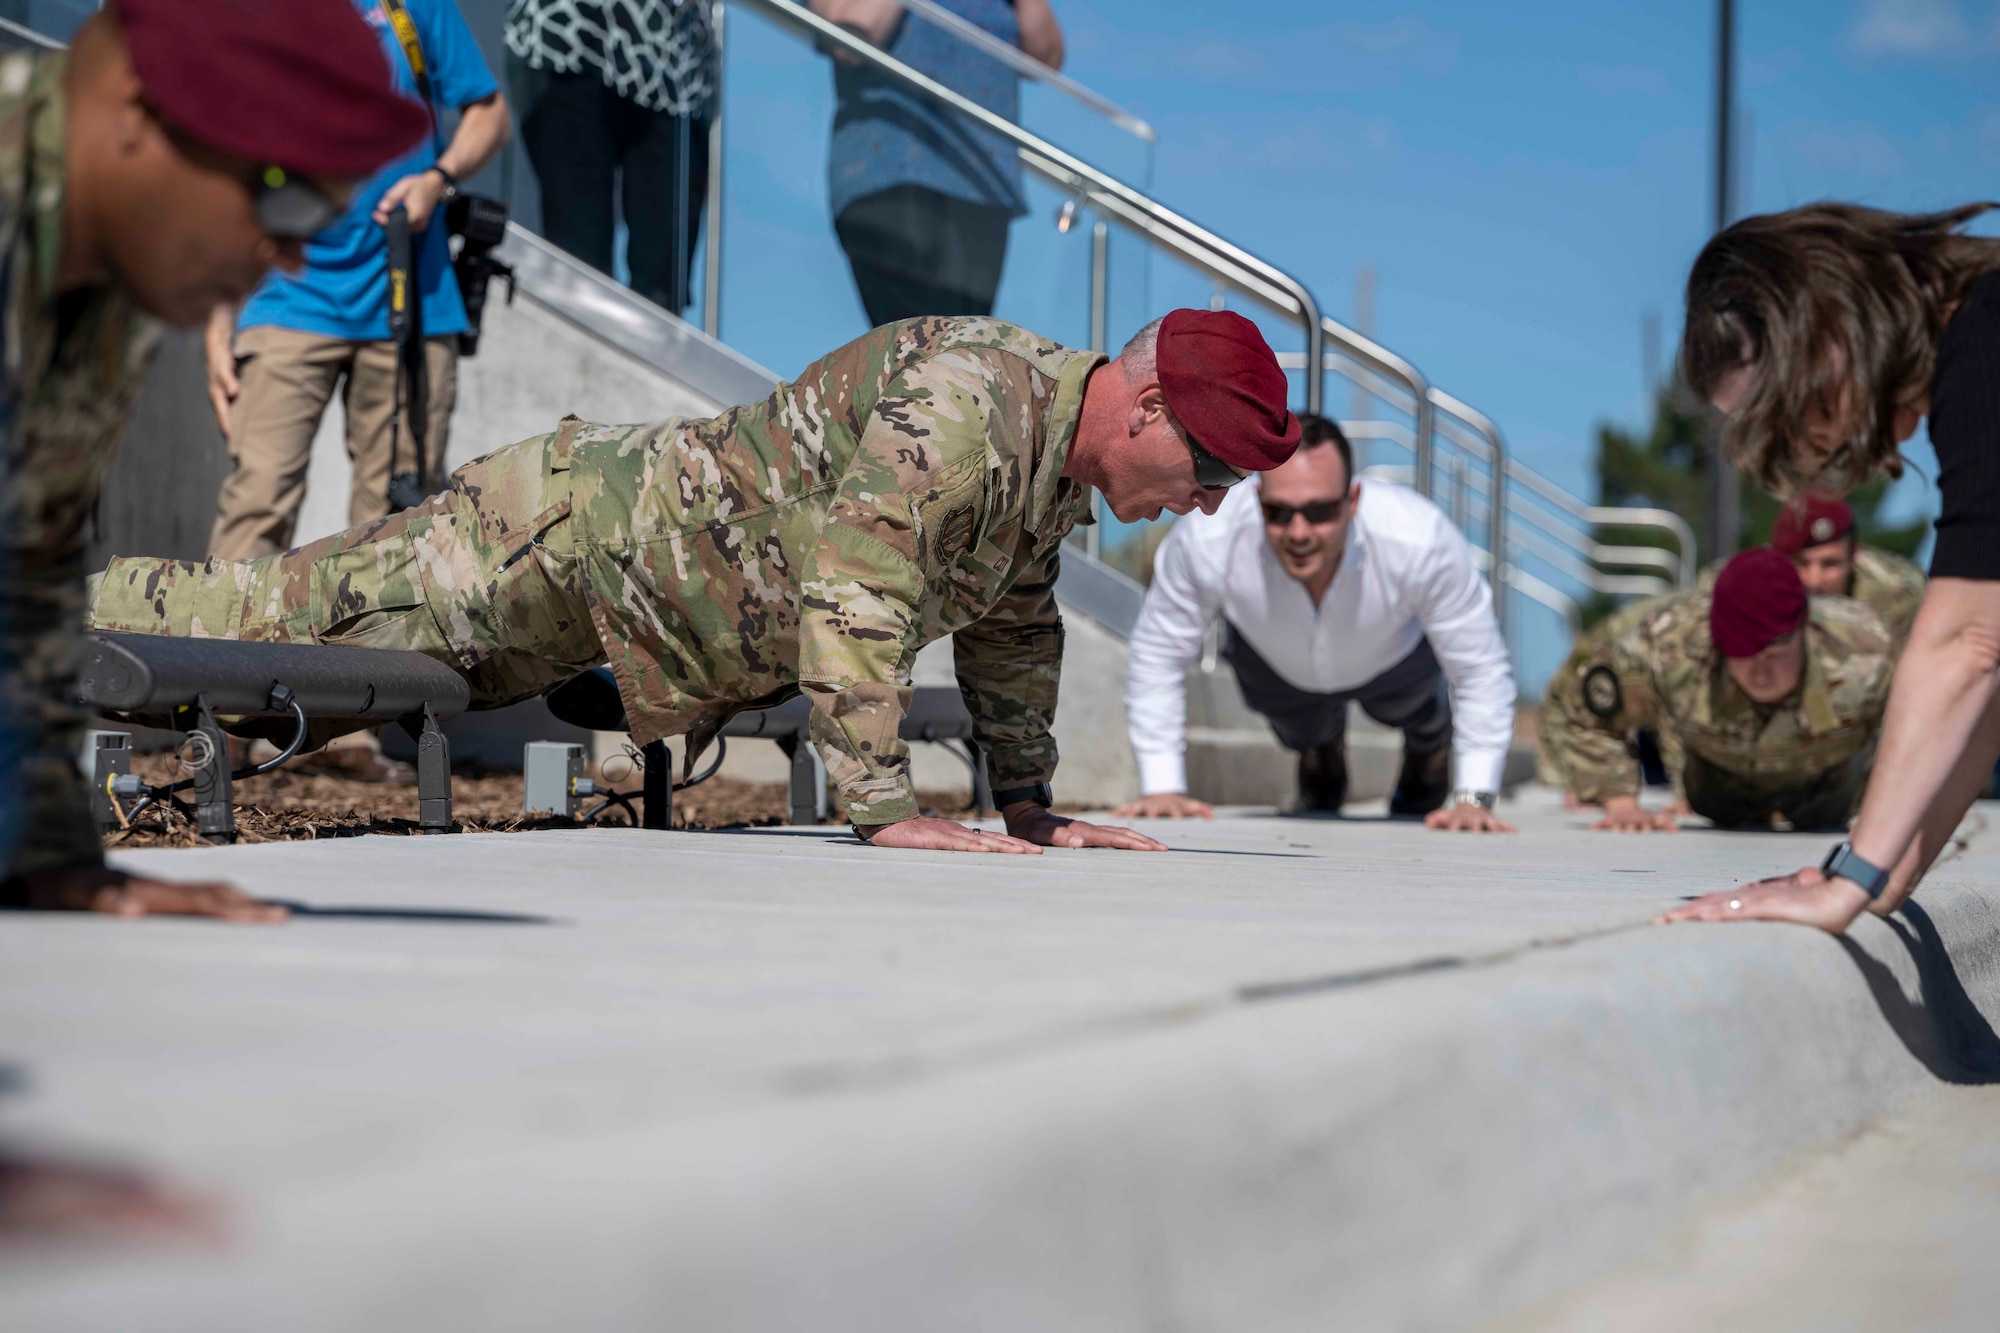 A man conducting push-ups while calling out commands for the crowd to follow.